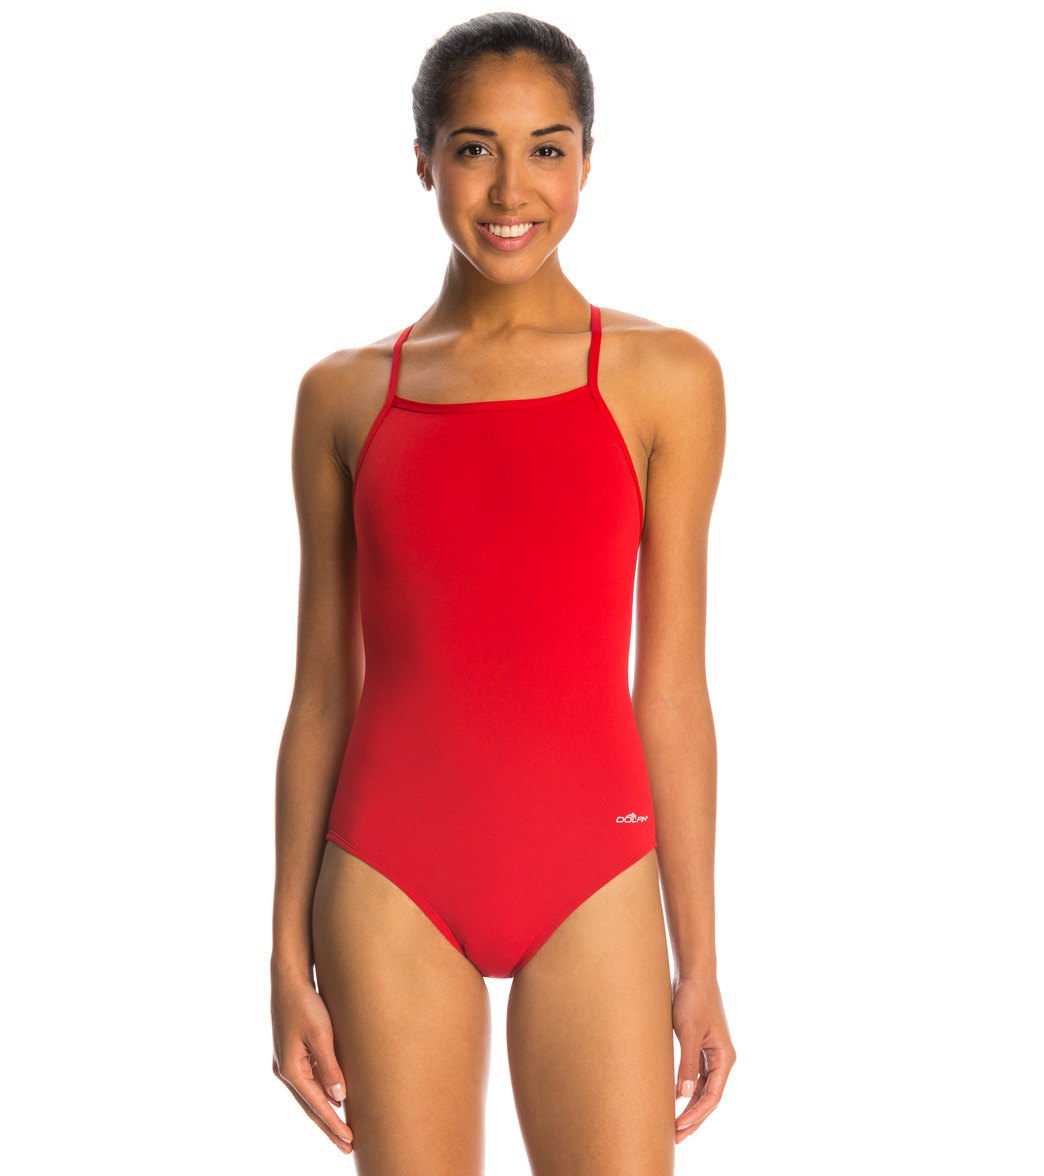 Dolfin Reliance Solid V-Back One Piece Swimsuit - Red 26 - Swimoutlet.com